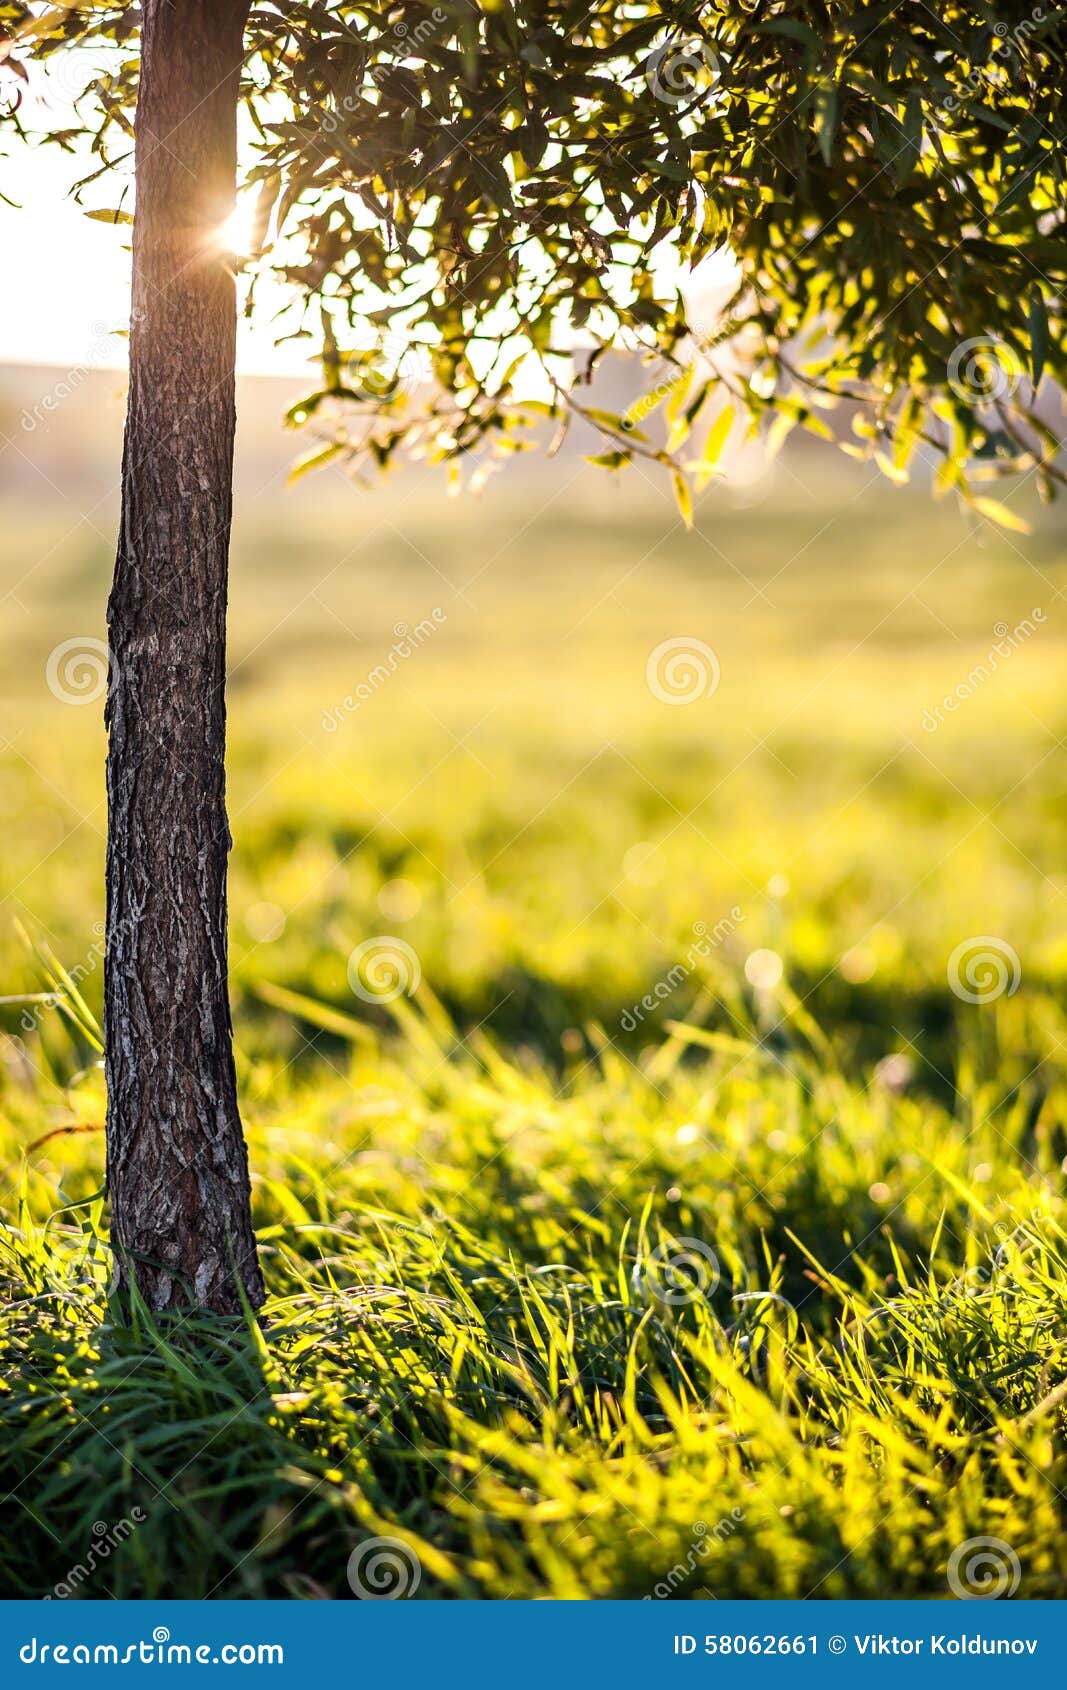 The Birth of a New Day in Nature Stock Image - Image of spring ...